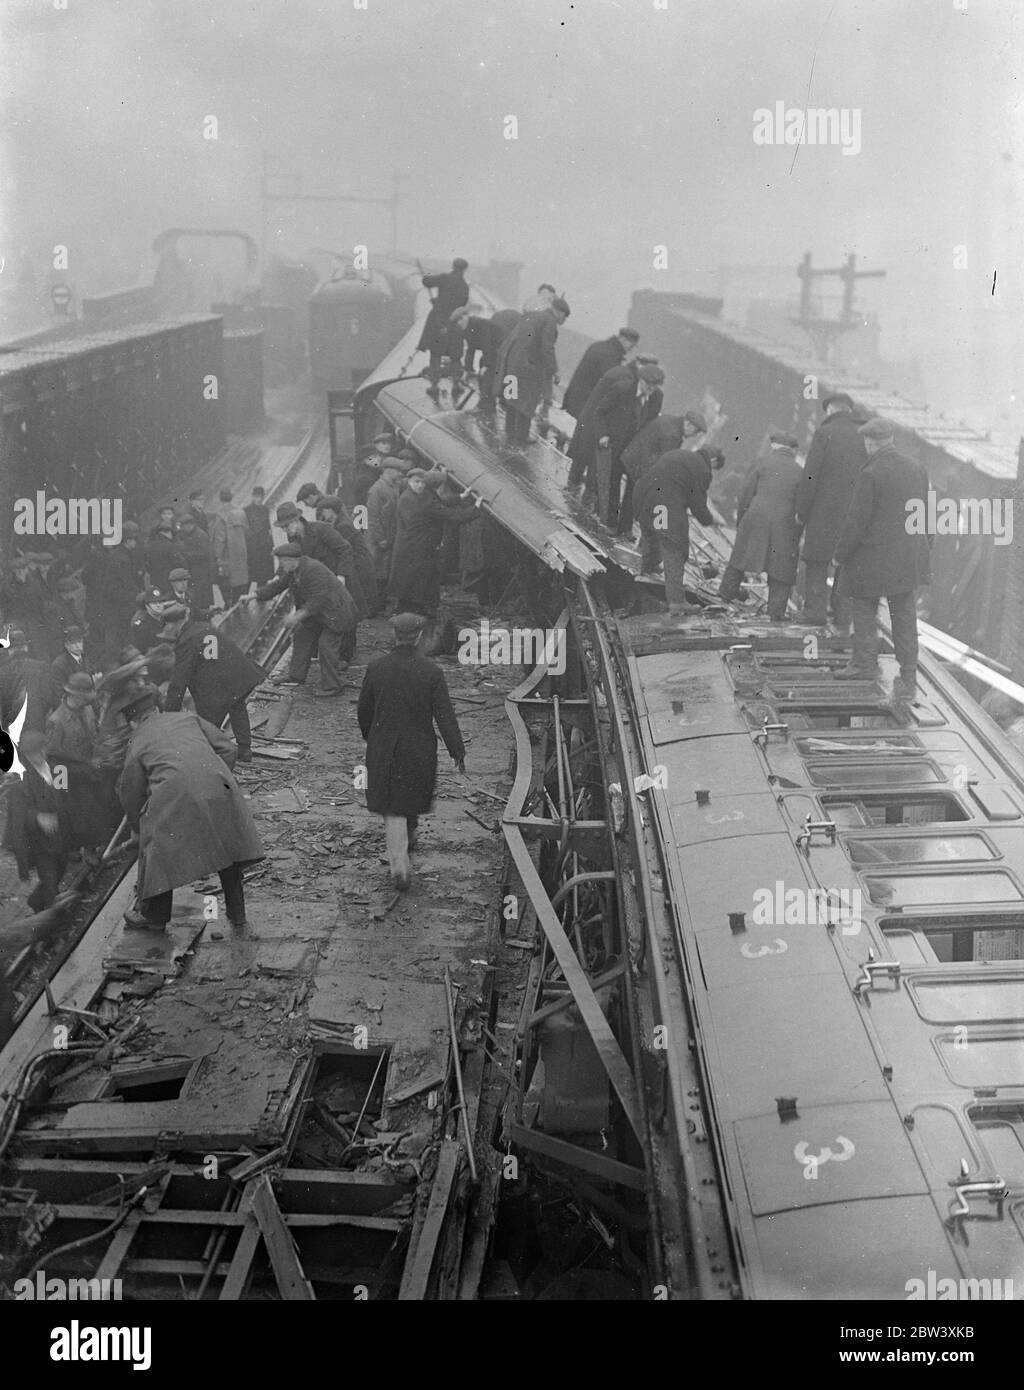 12 people were killed and nearly 50 injured when the electric trains collided head-on at Fourspan Bridge between Queen's Road and Battersea Park Station. Coaches were telescoped and overturned. Photo shows: A general view at the scene of the smash. Pictures taken a few minutes after the crash. 2 April 1937 Stock Photo